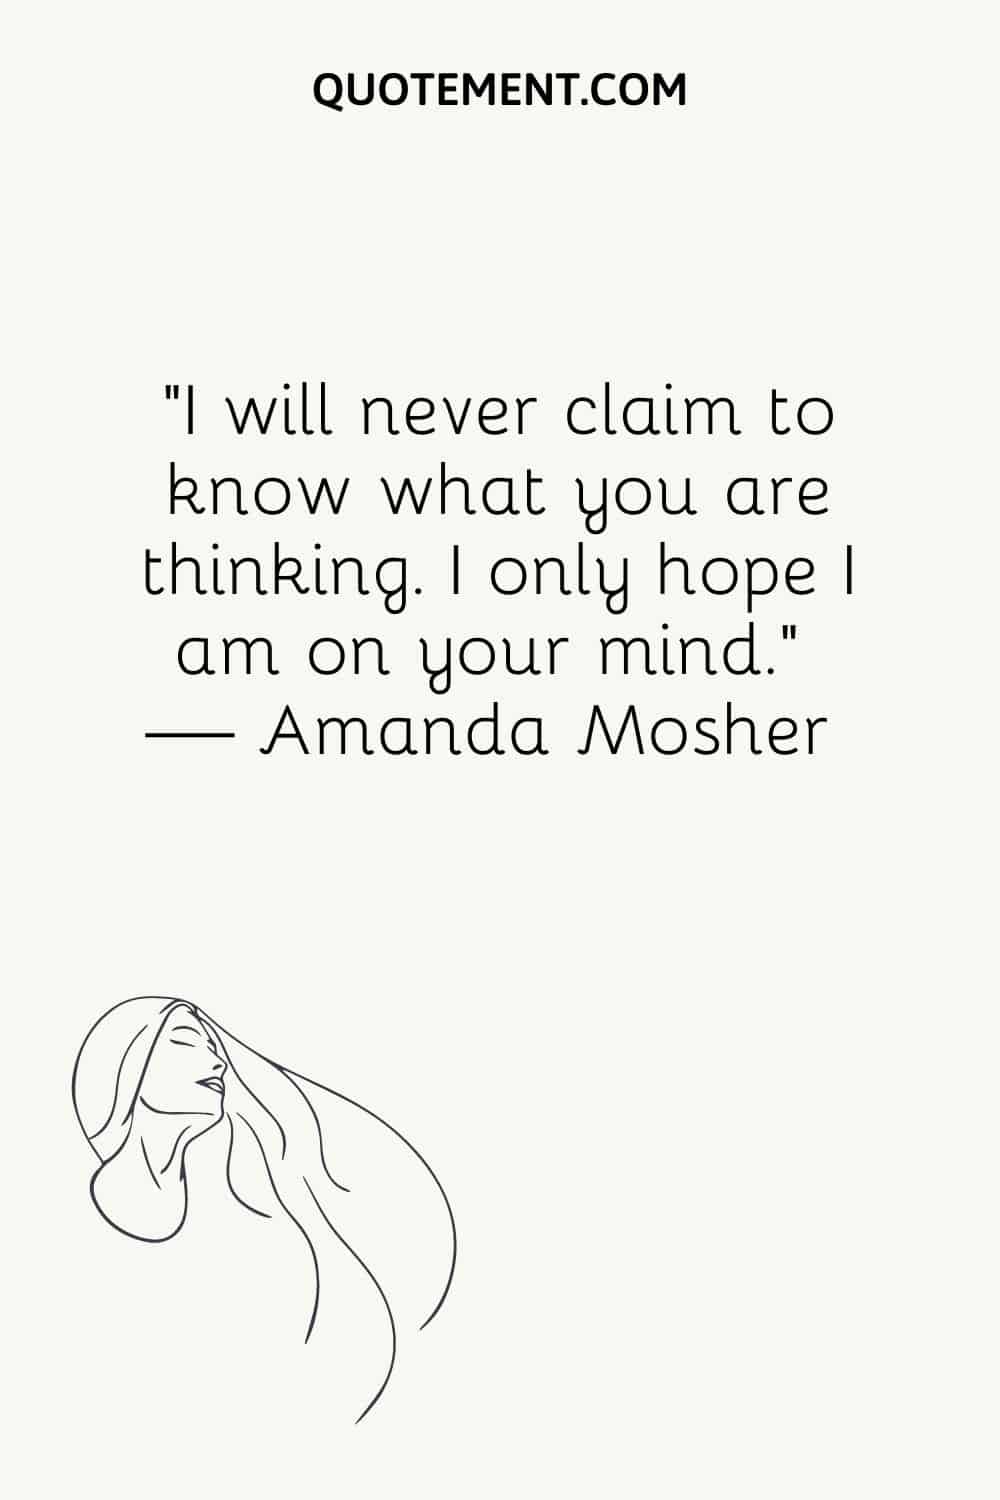 “I will never claim to know what you are thinking. I only hope I am on your mind.” — Amanda Mosher